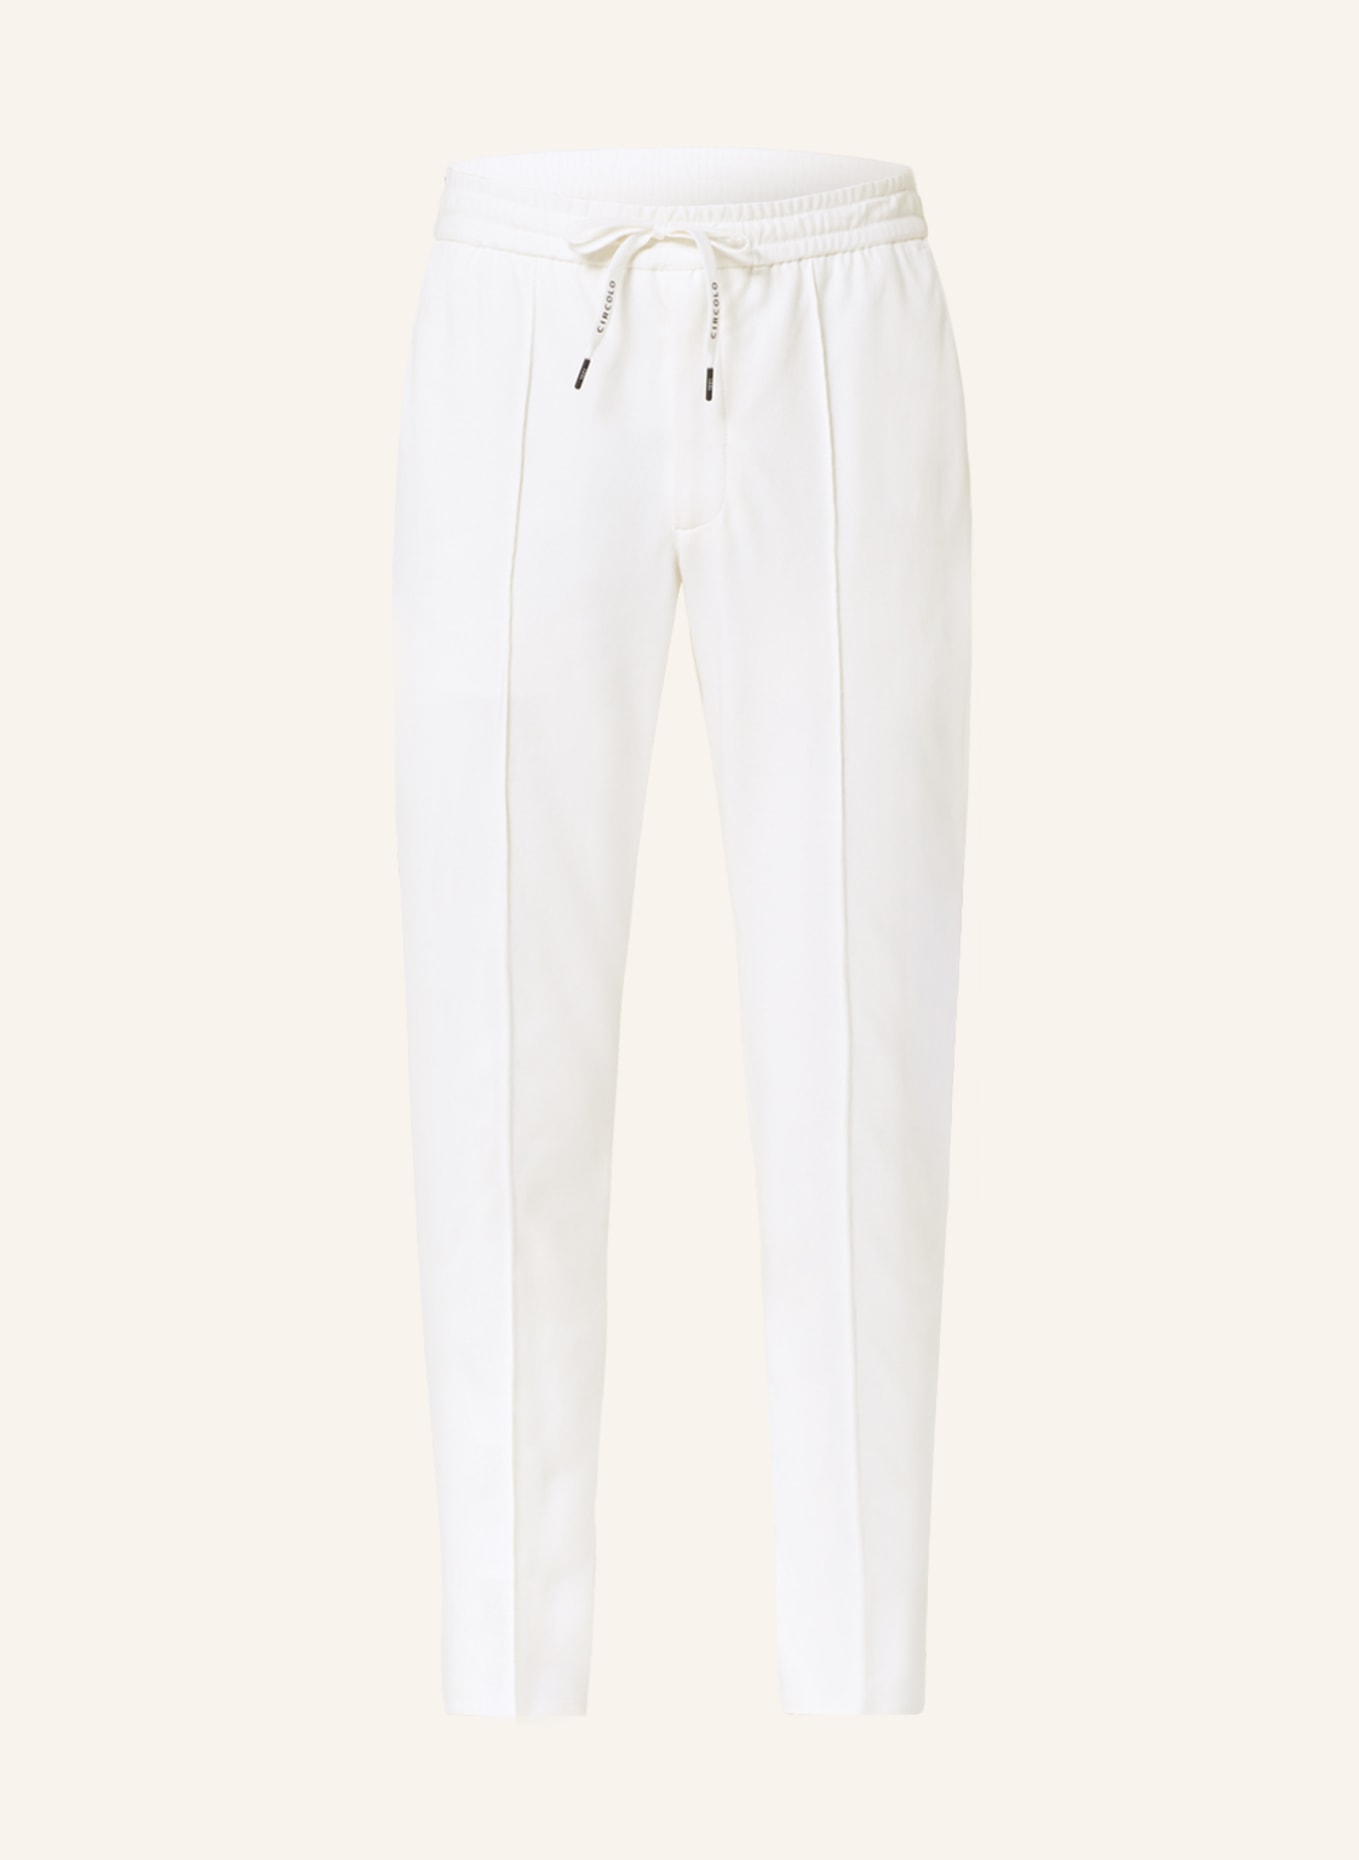 CIRCOLO 1901 Piqué trousers slim fit in jogger style, Color: WHITE(Image null)